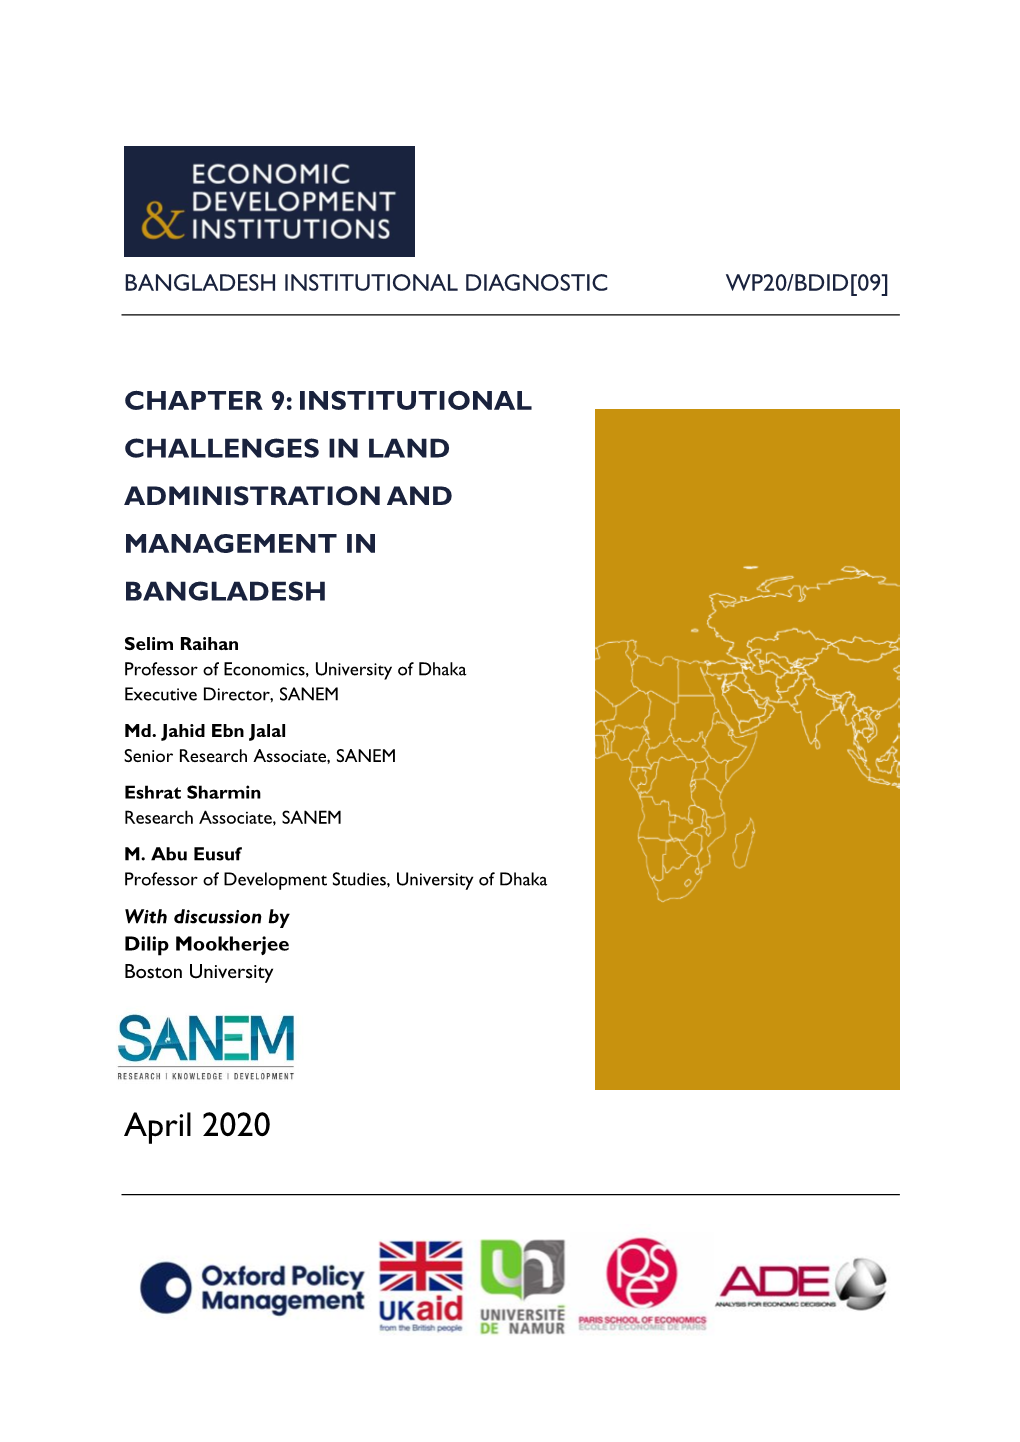 Chapter 9: Institutional Challenges in Land Administration and Management in Bangladesh